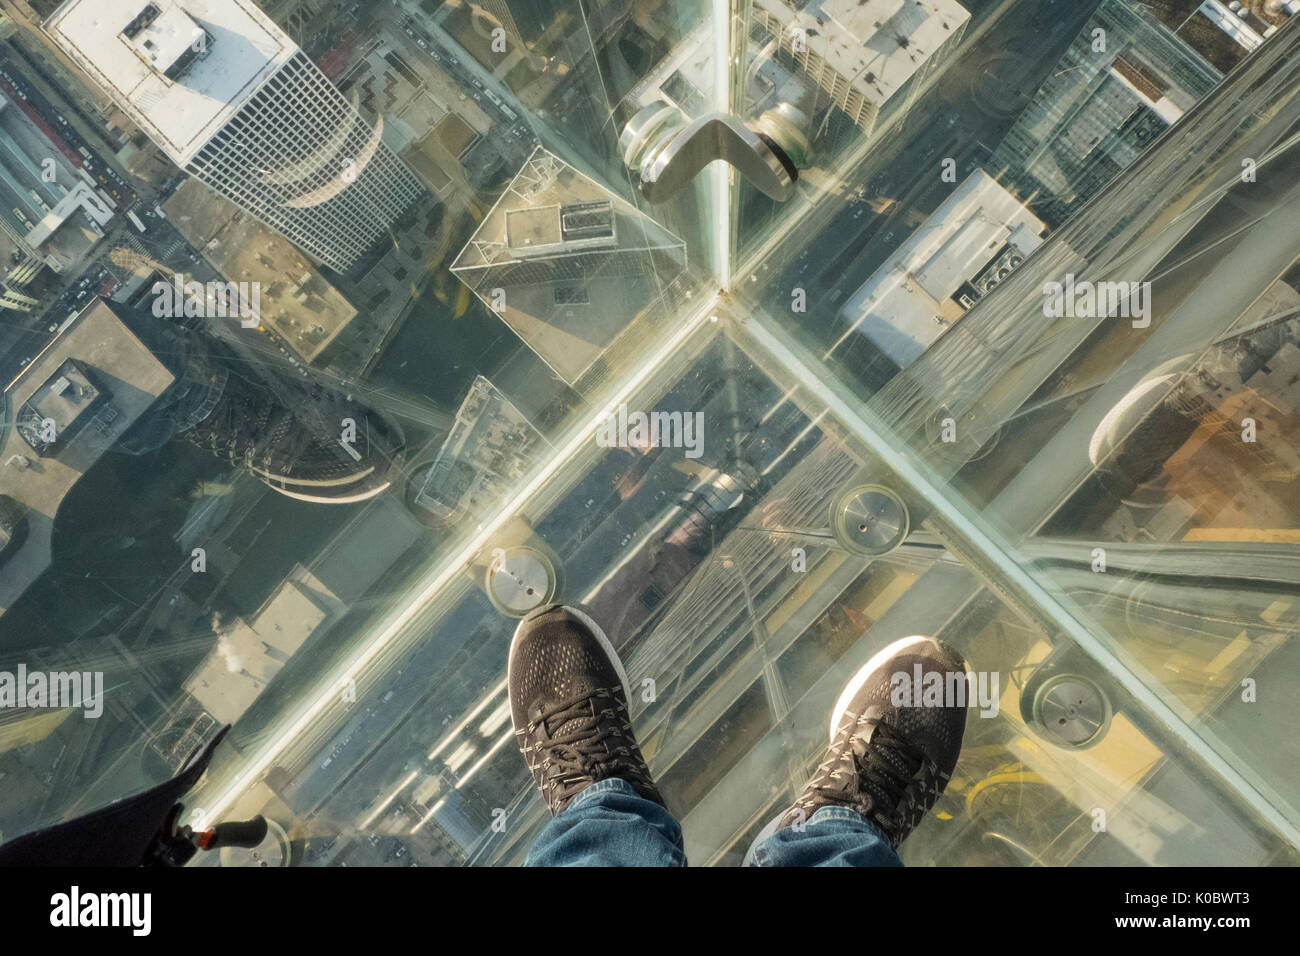 Skydeck, Willis Tower, Chicago Stock Photo